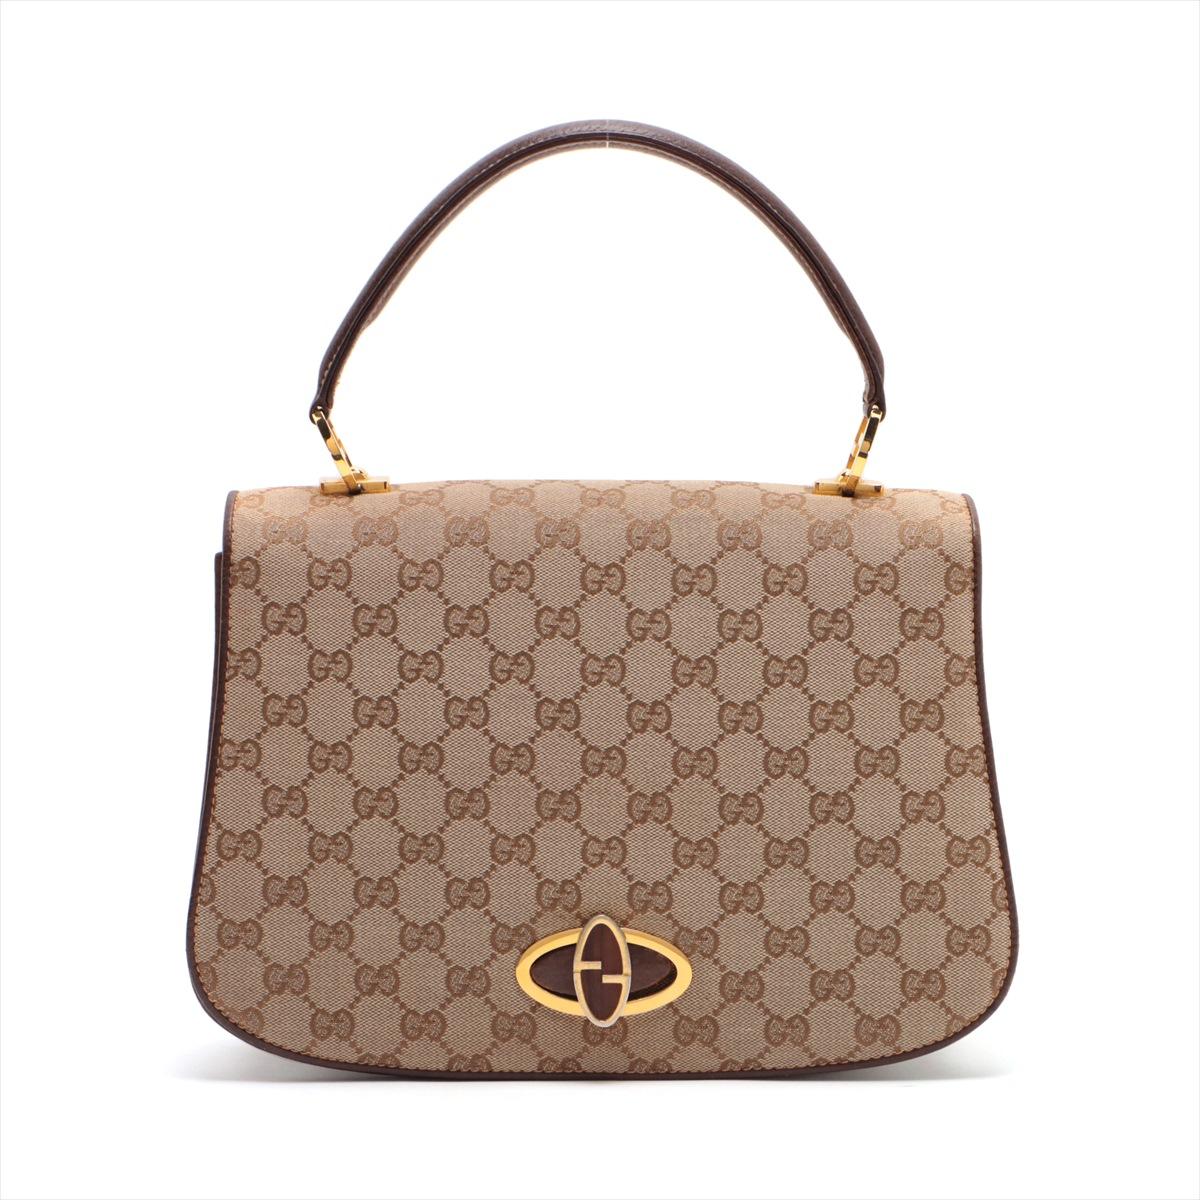 The Gucci GG Canvas Top Handle Bag in Beige is a timeless and sophisticated accessory, epitomizing the brand's signature style. Crafted from the iconic GG canvas, the bag features Gucci's classic monogram print in a versatile beige hue, exuding